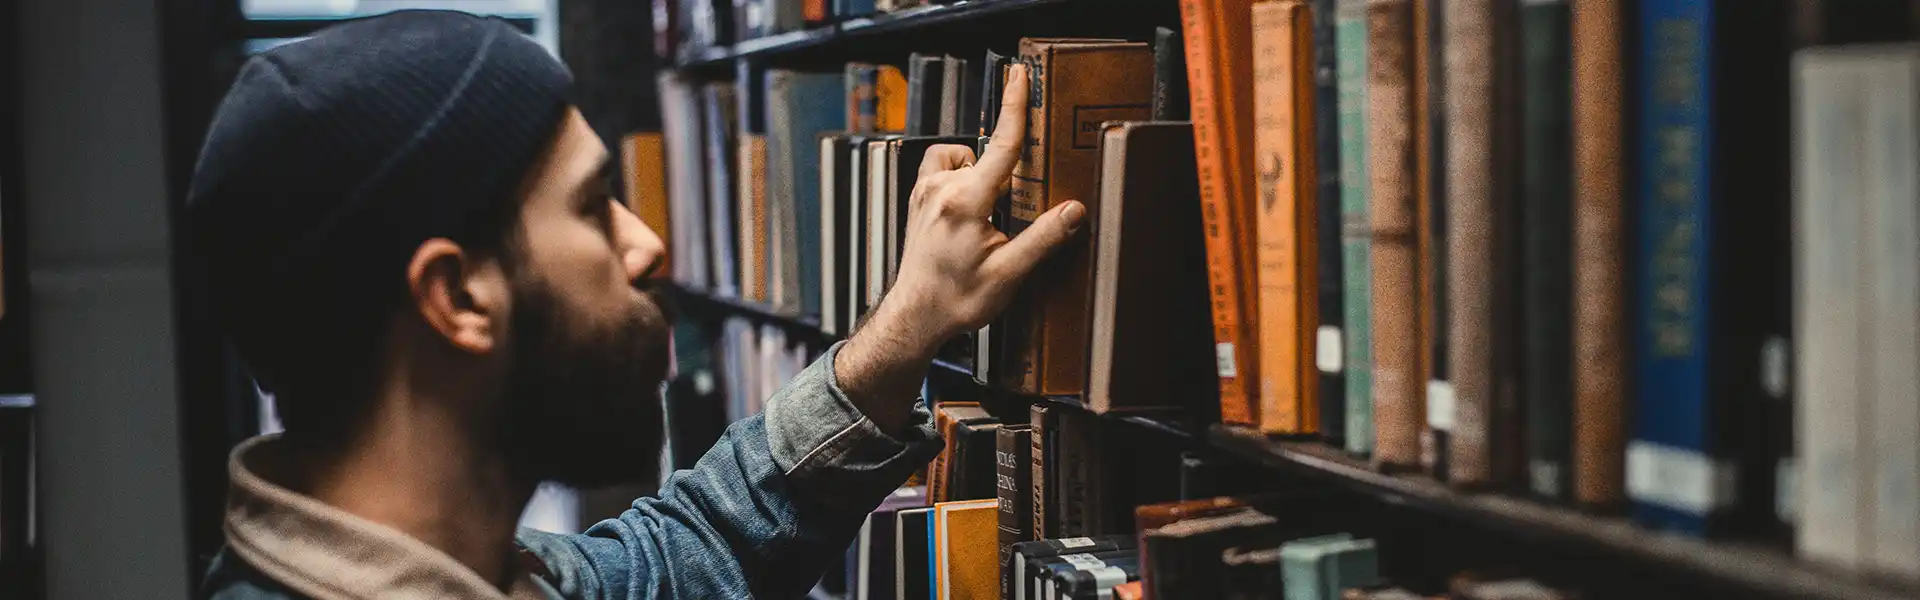 Man with a beard wearing a knit cap and denim jacket pulls a book off the shelf in a library